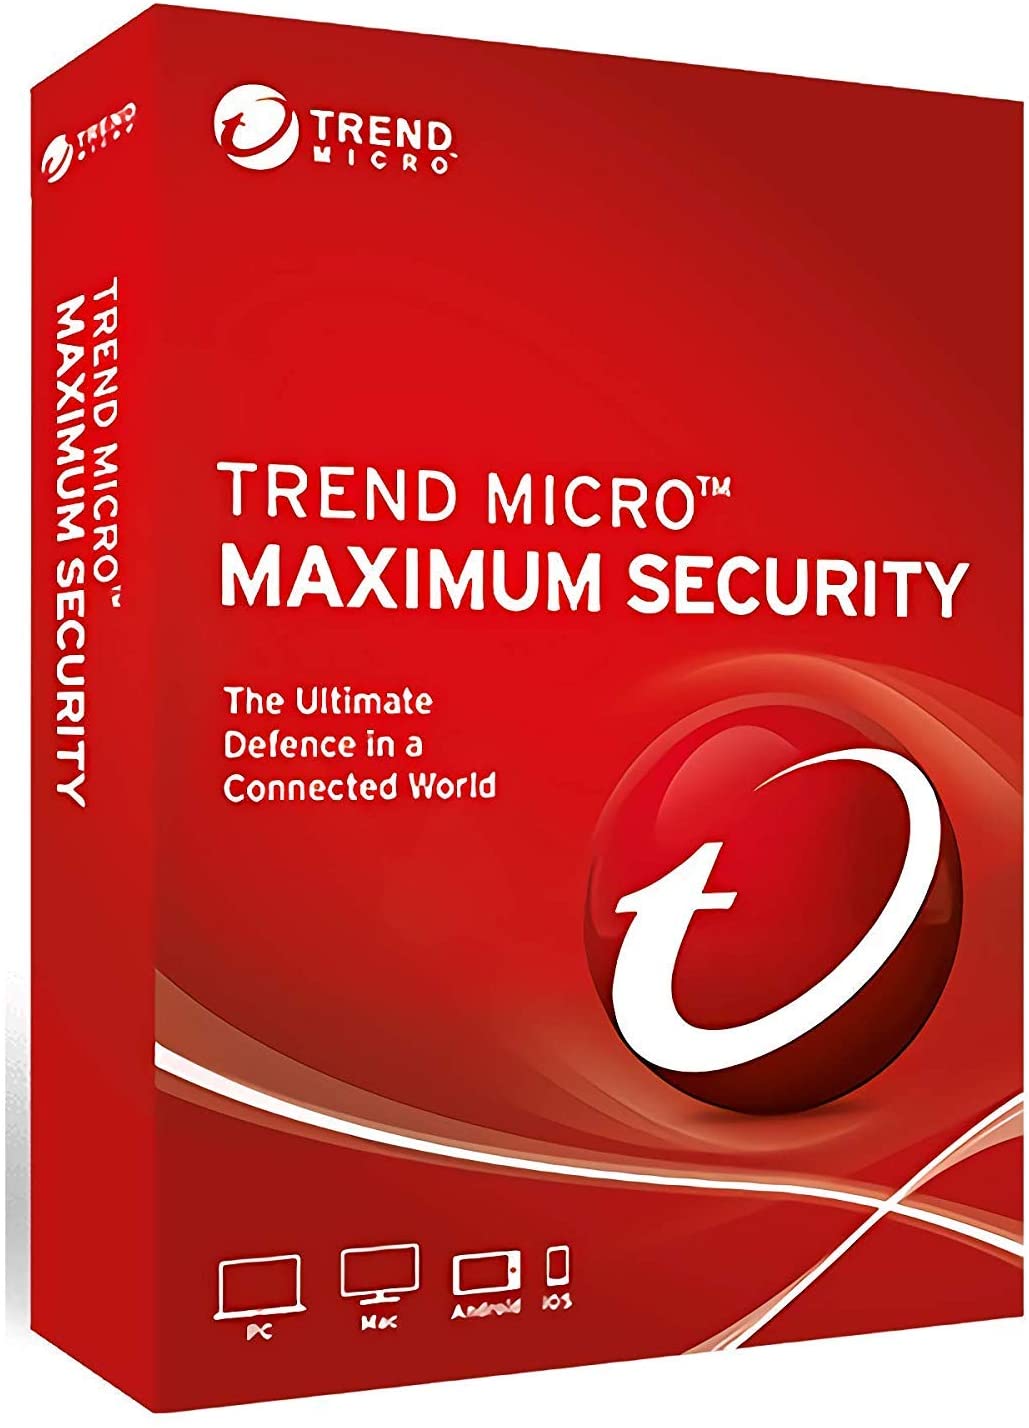 download center trend micro internet security 2019 15